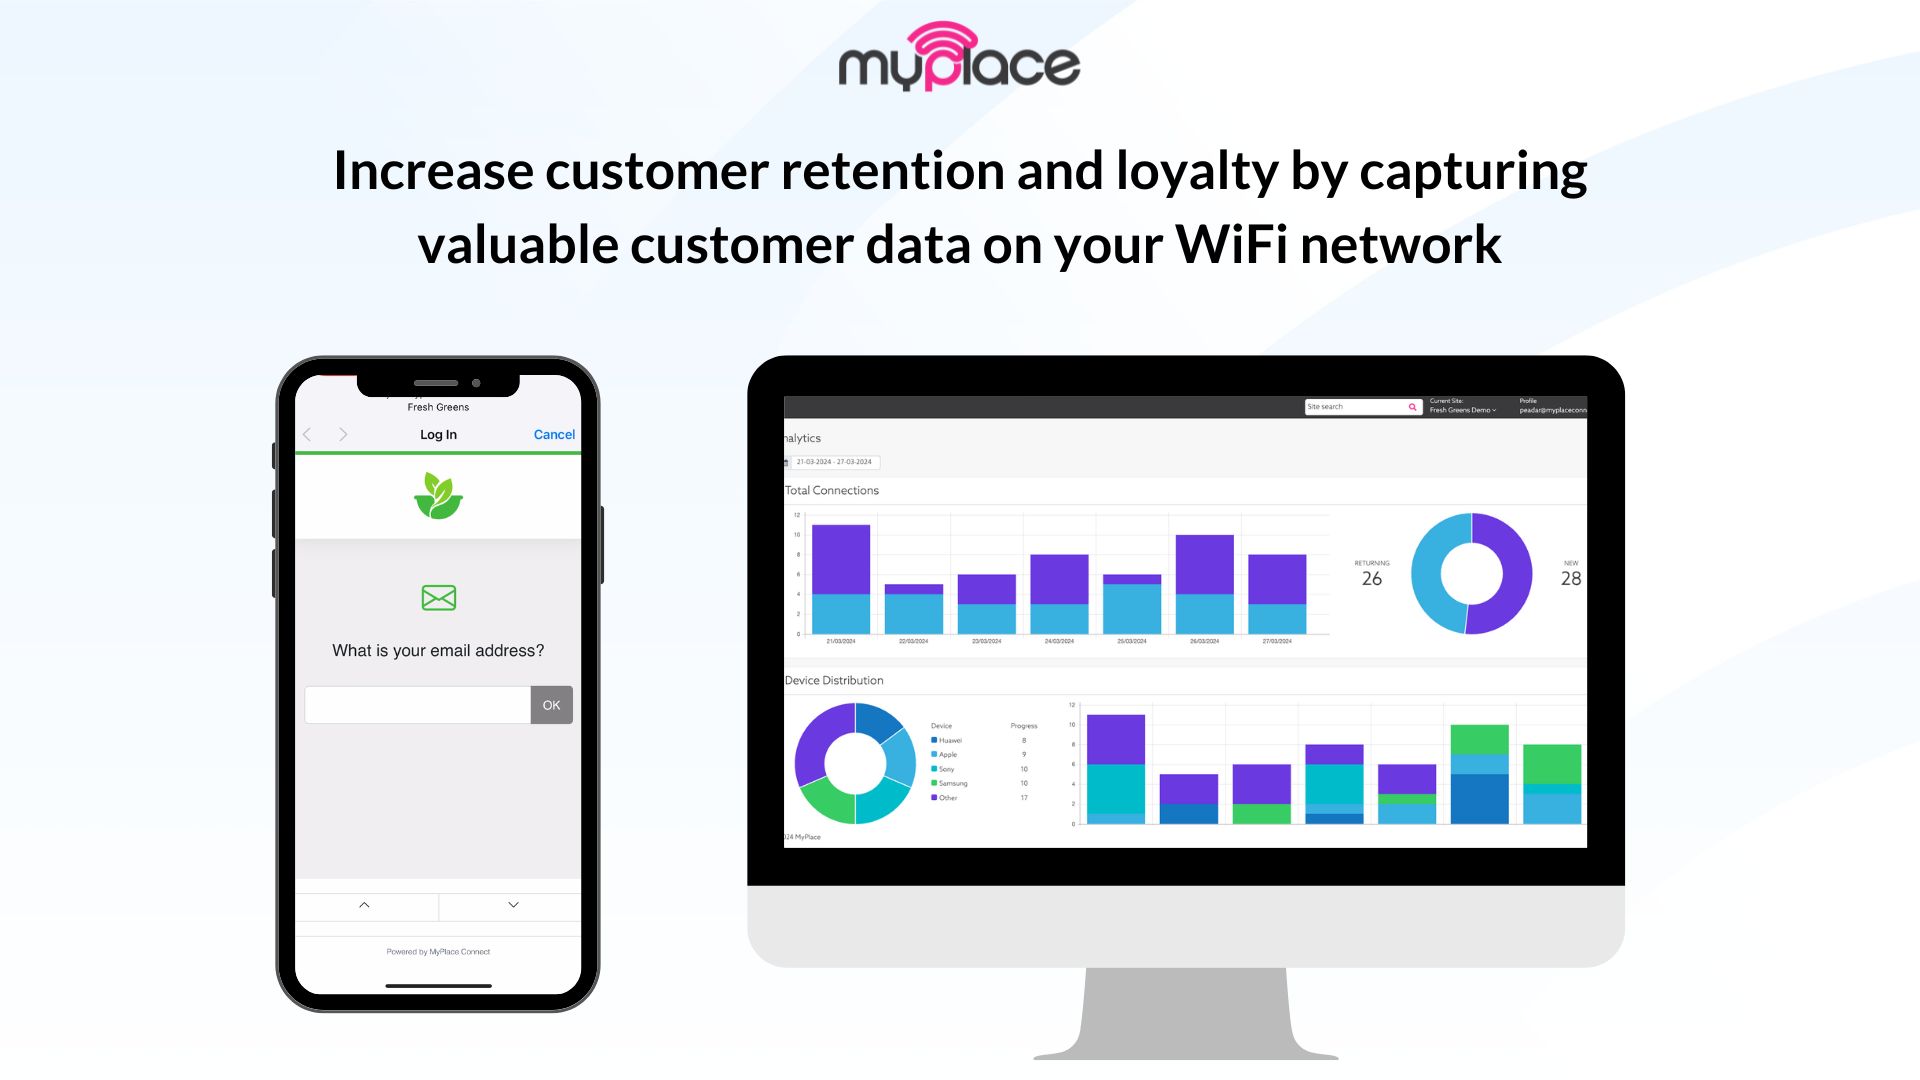 Increase customer retention and loyalty by capturing valuable customer data on your WiFi network